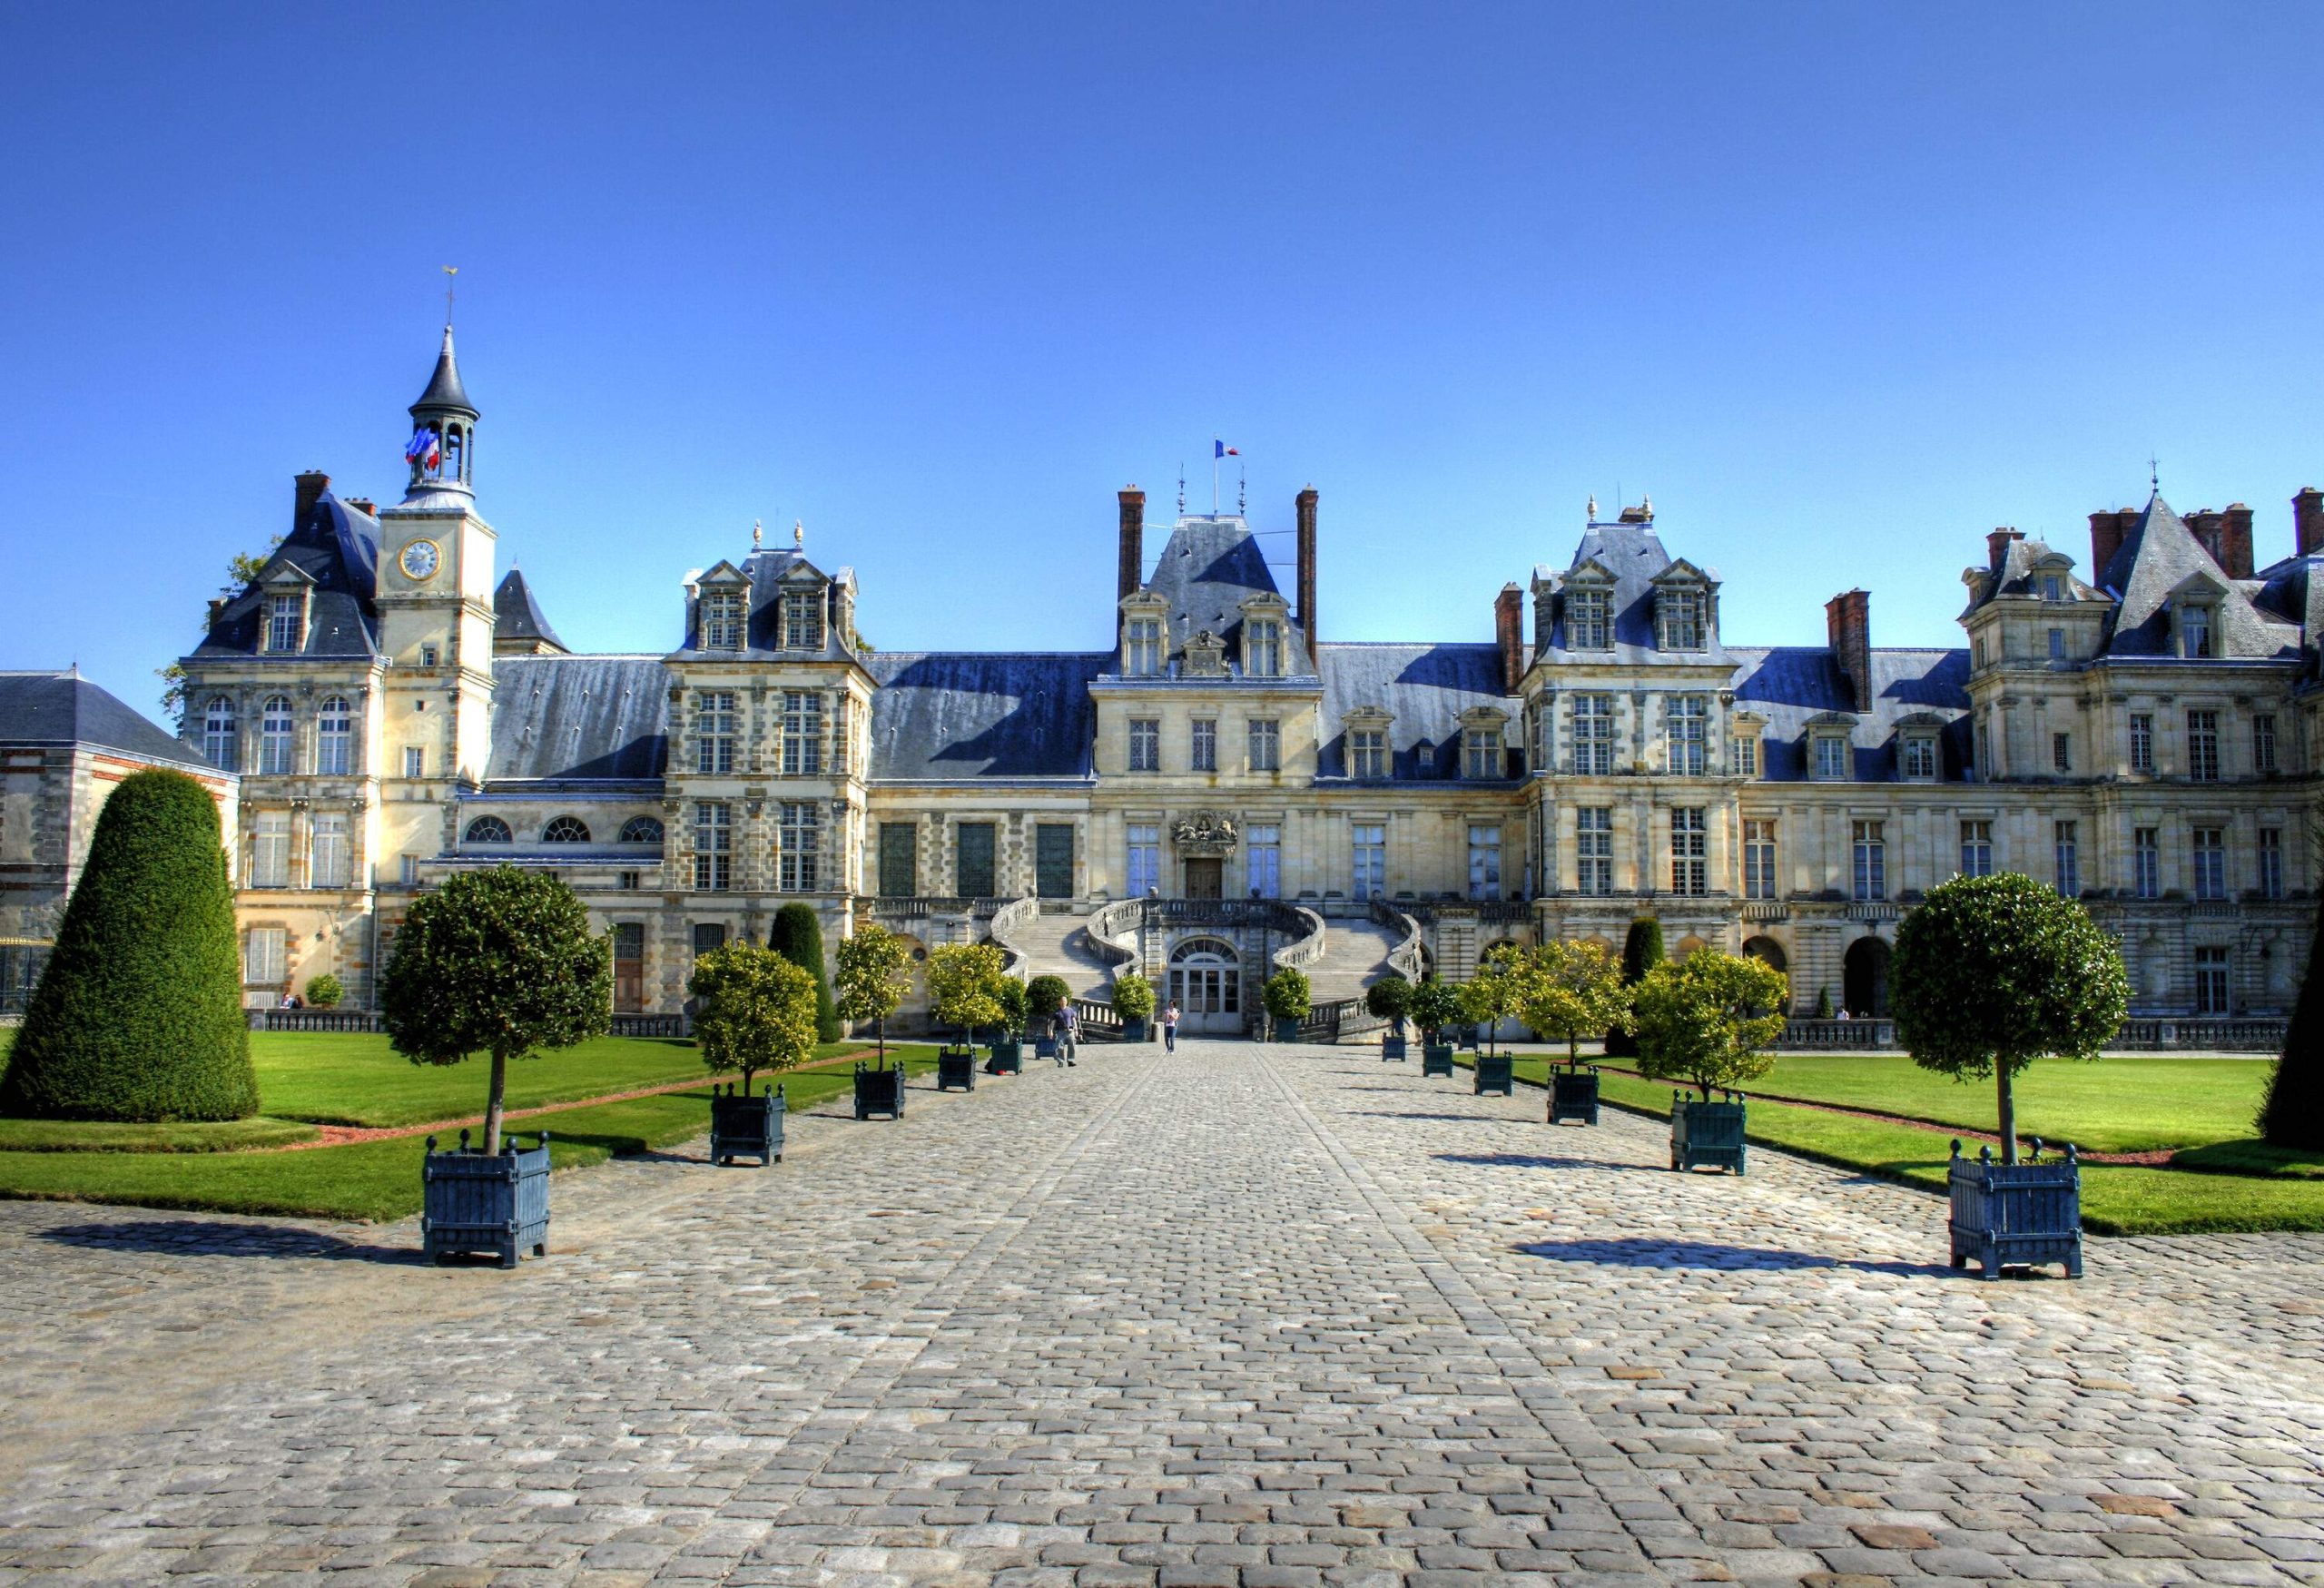 A cobblestone path lined with potted plants and green lawn leads to the Palace of Fontainebleau, a medieval manor house with an outdoor double staircase, multiple windows, and blue roofing.